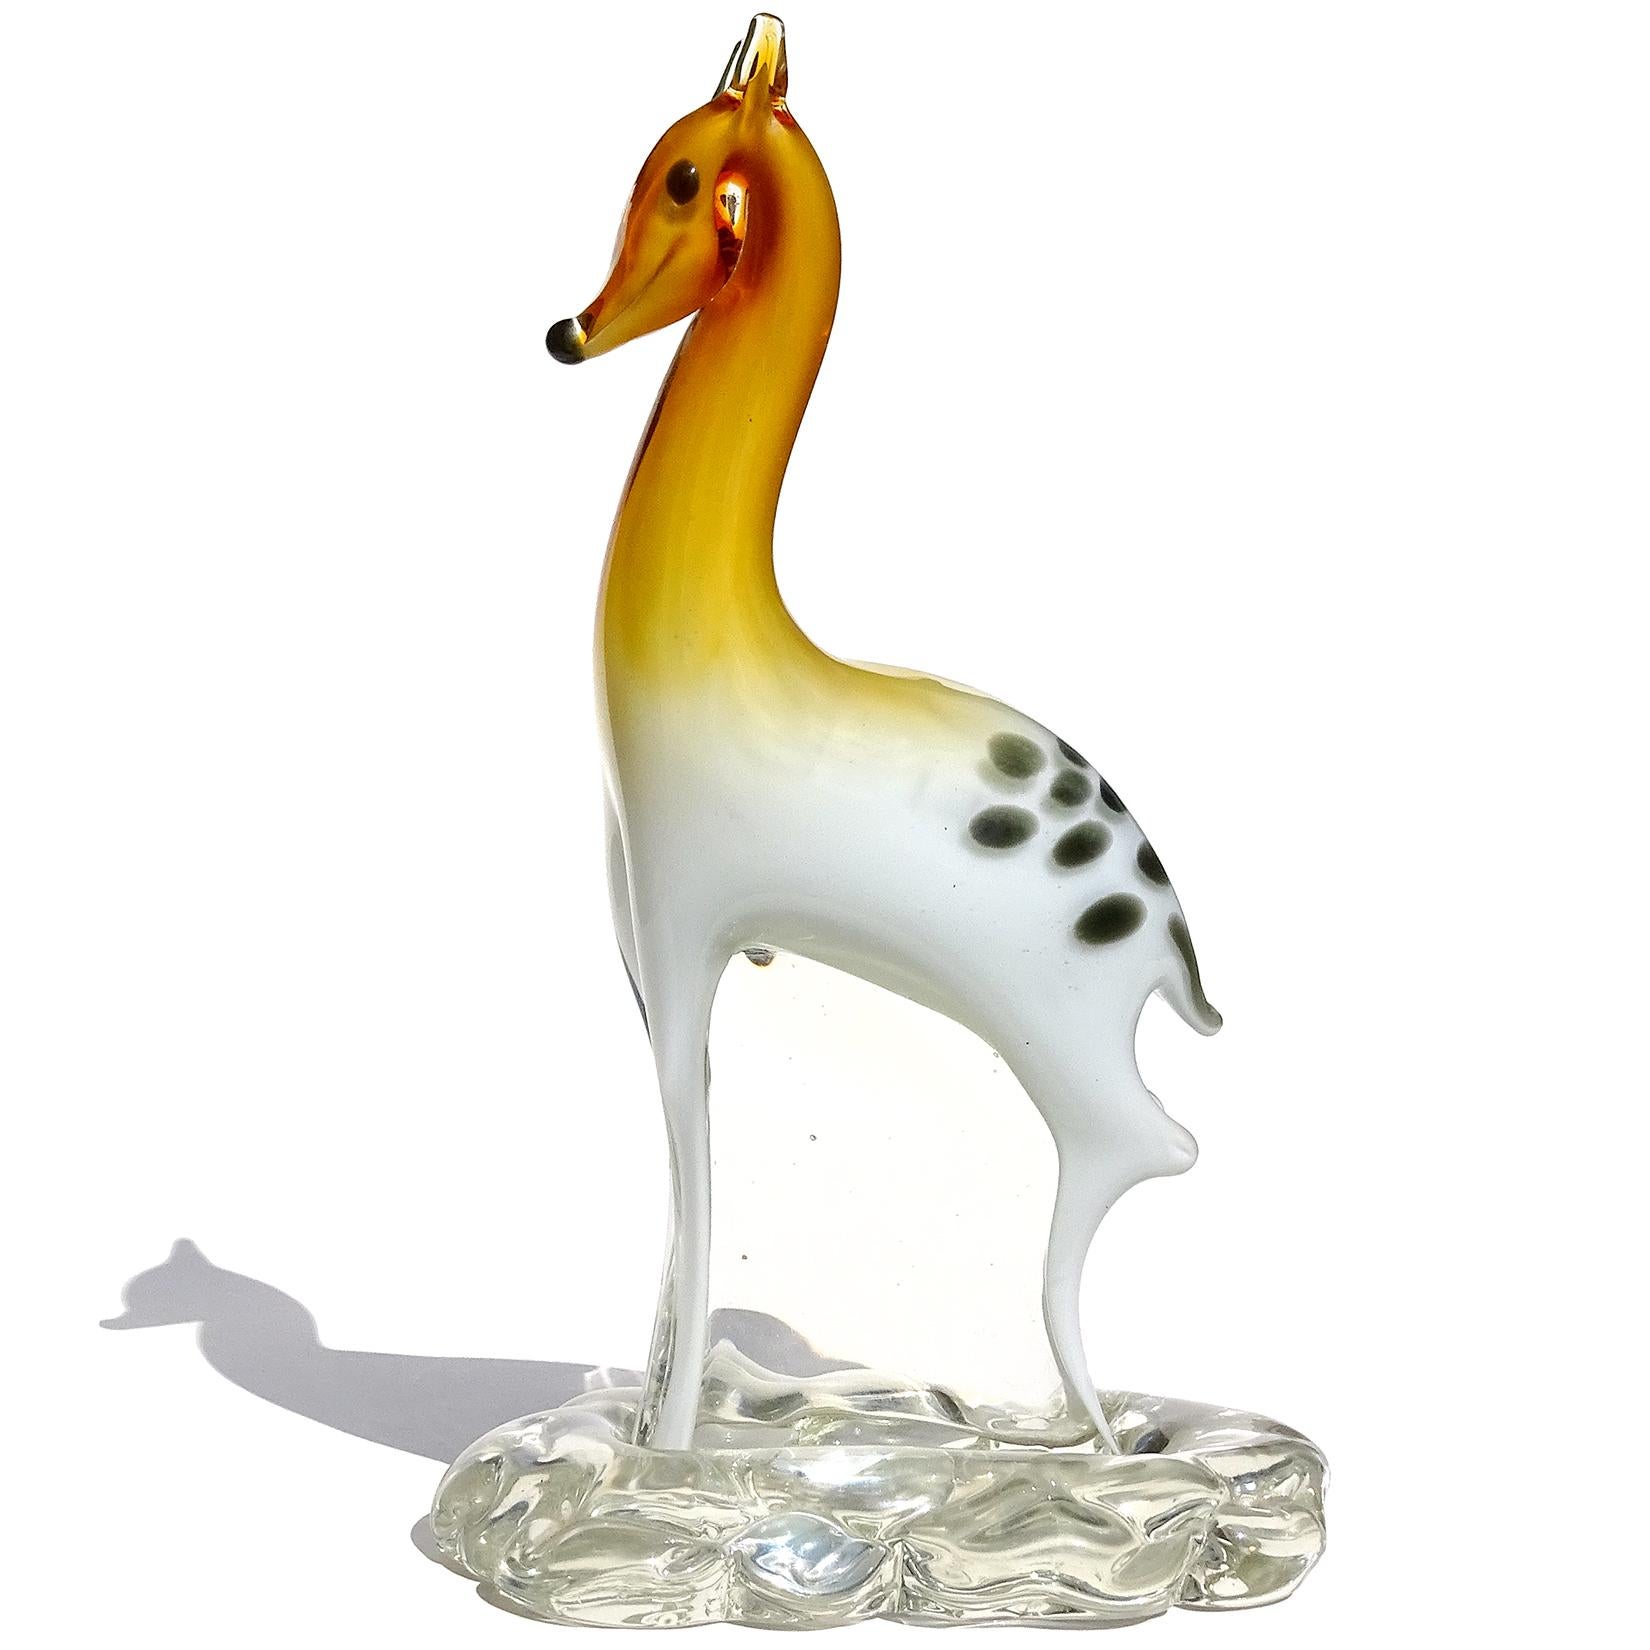 Beautiful vintage Murano hand blown orange to white Italian art glass Bambi deer fawn sculpture. Attributed to Master glass artist and designer Alfredo Barbini, for the Salviati Company. The deer has an 